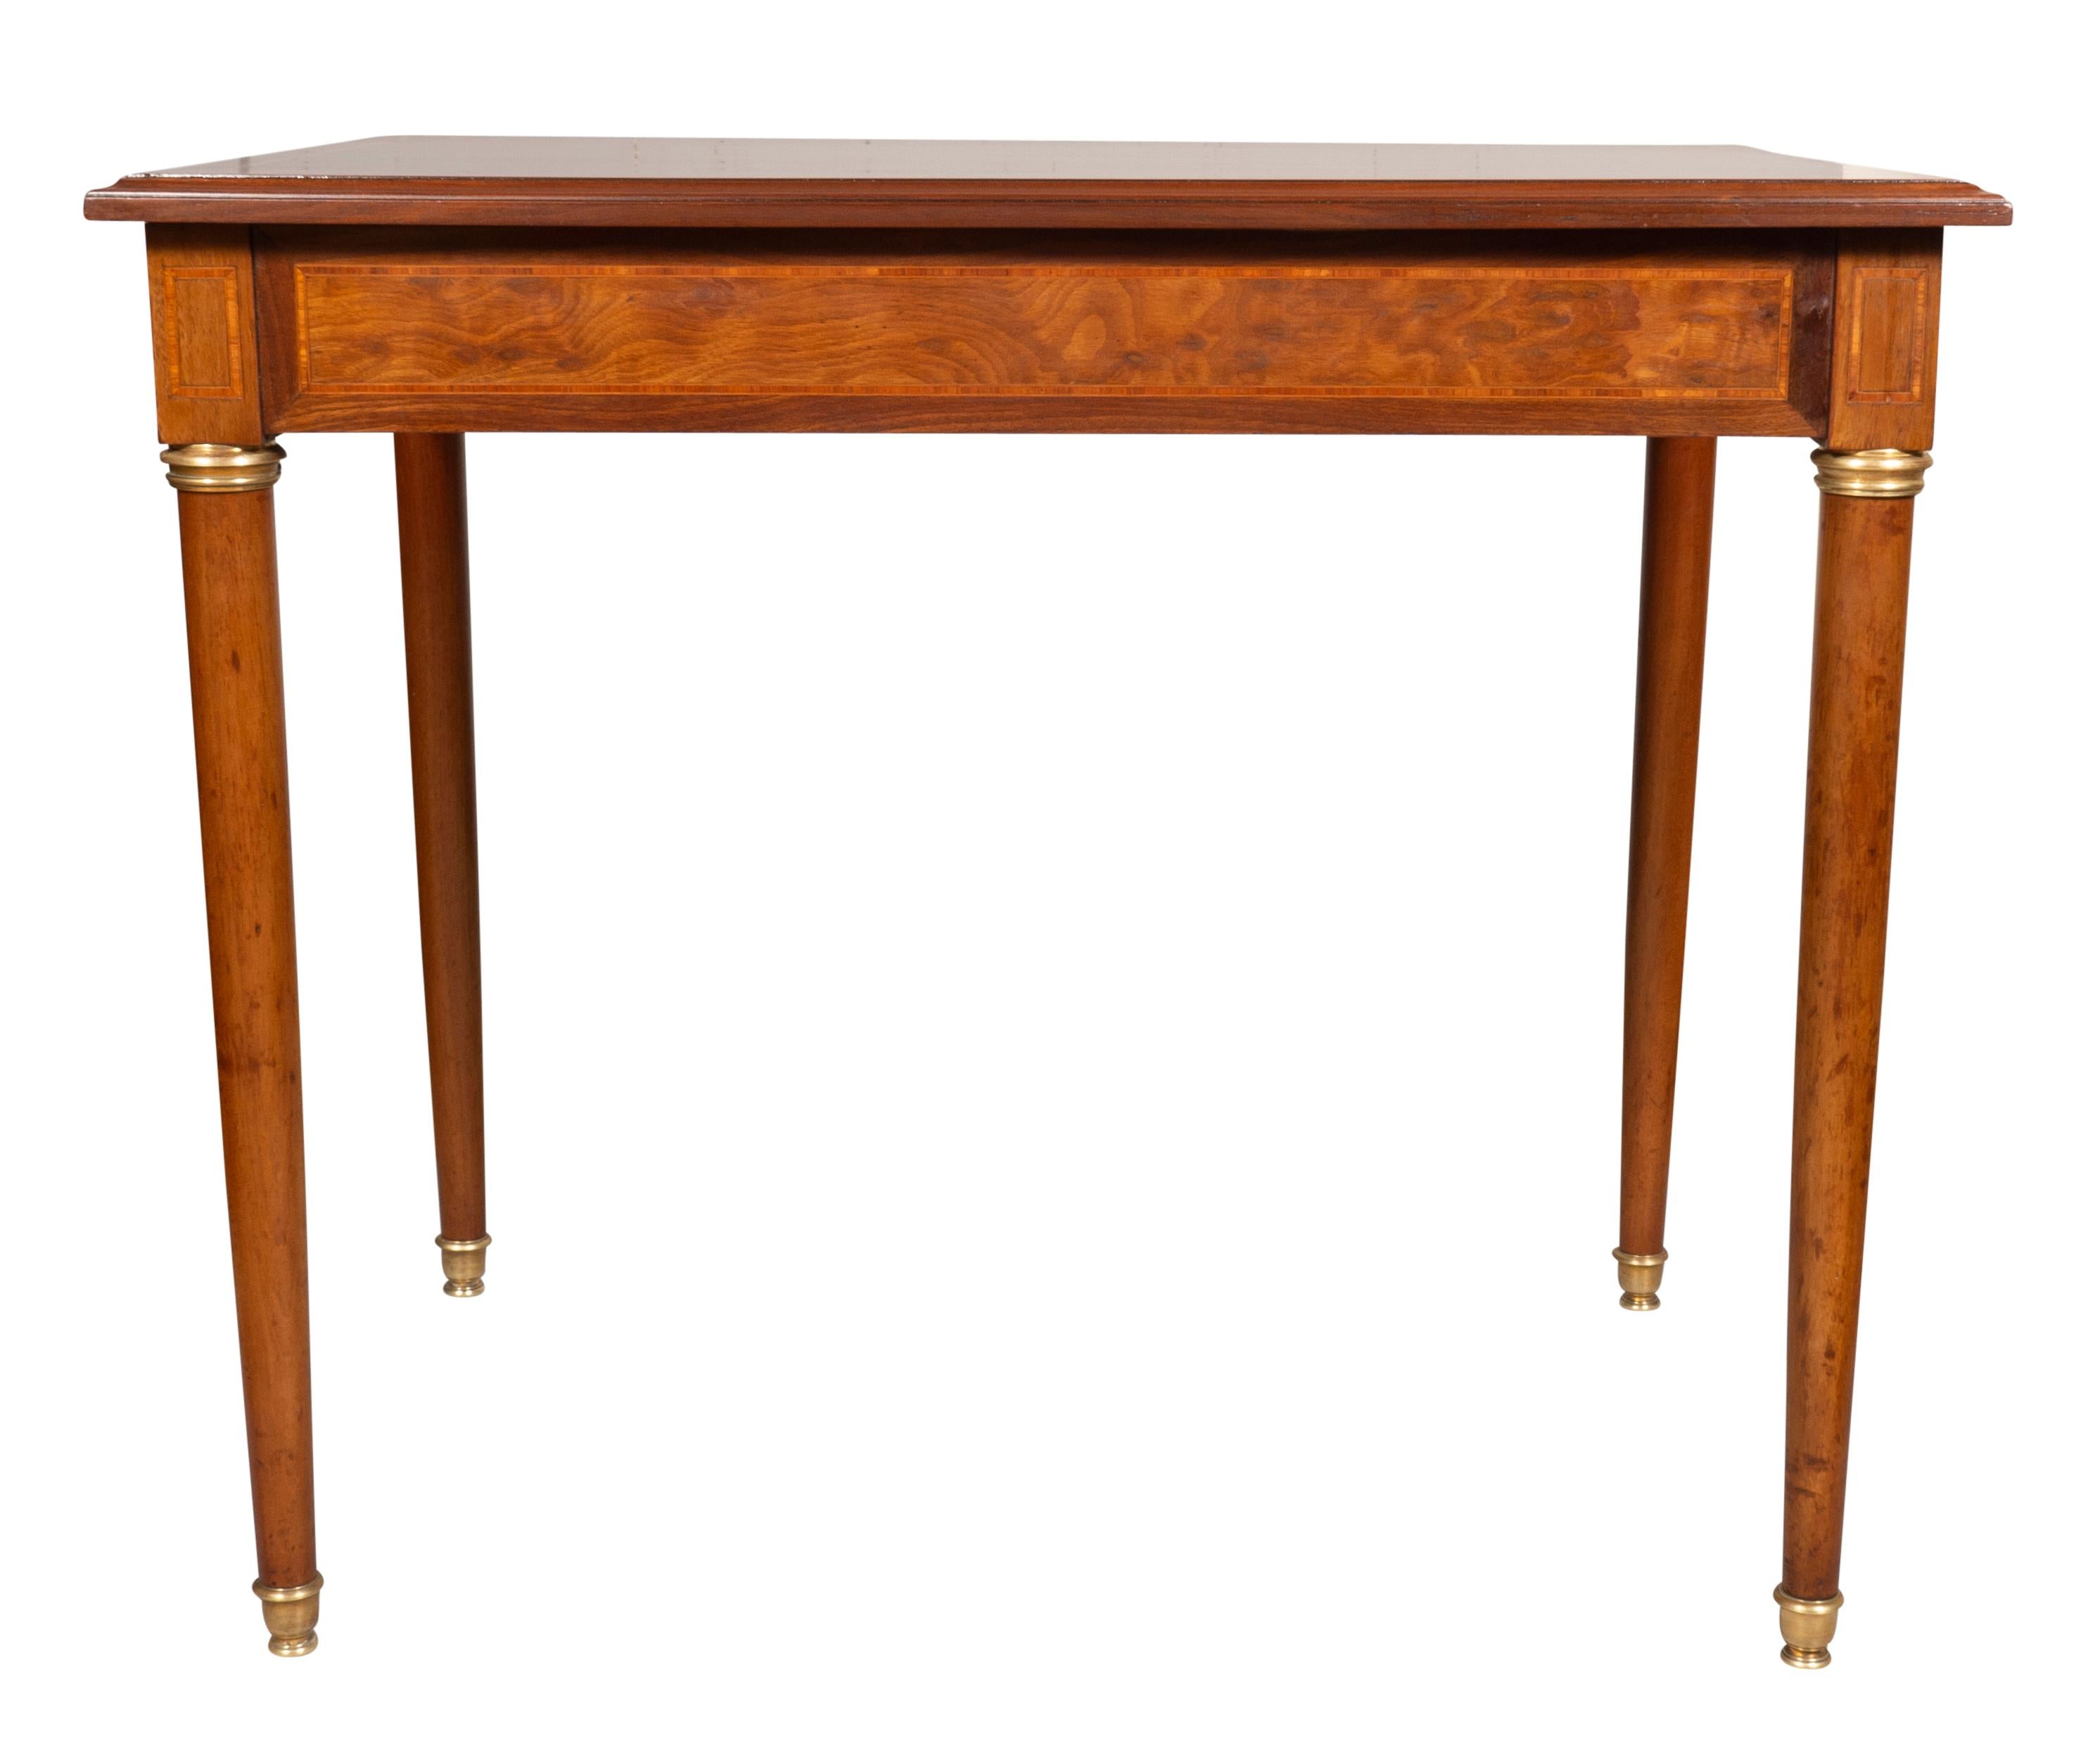 Late 19th Century Louis XVI Style Mahogany and Inlaid Table